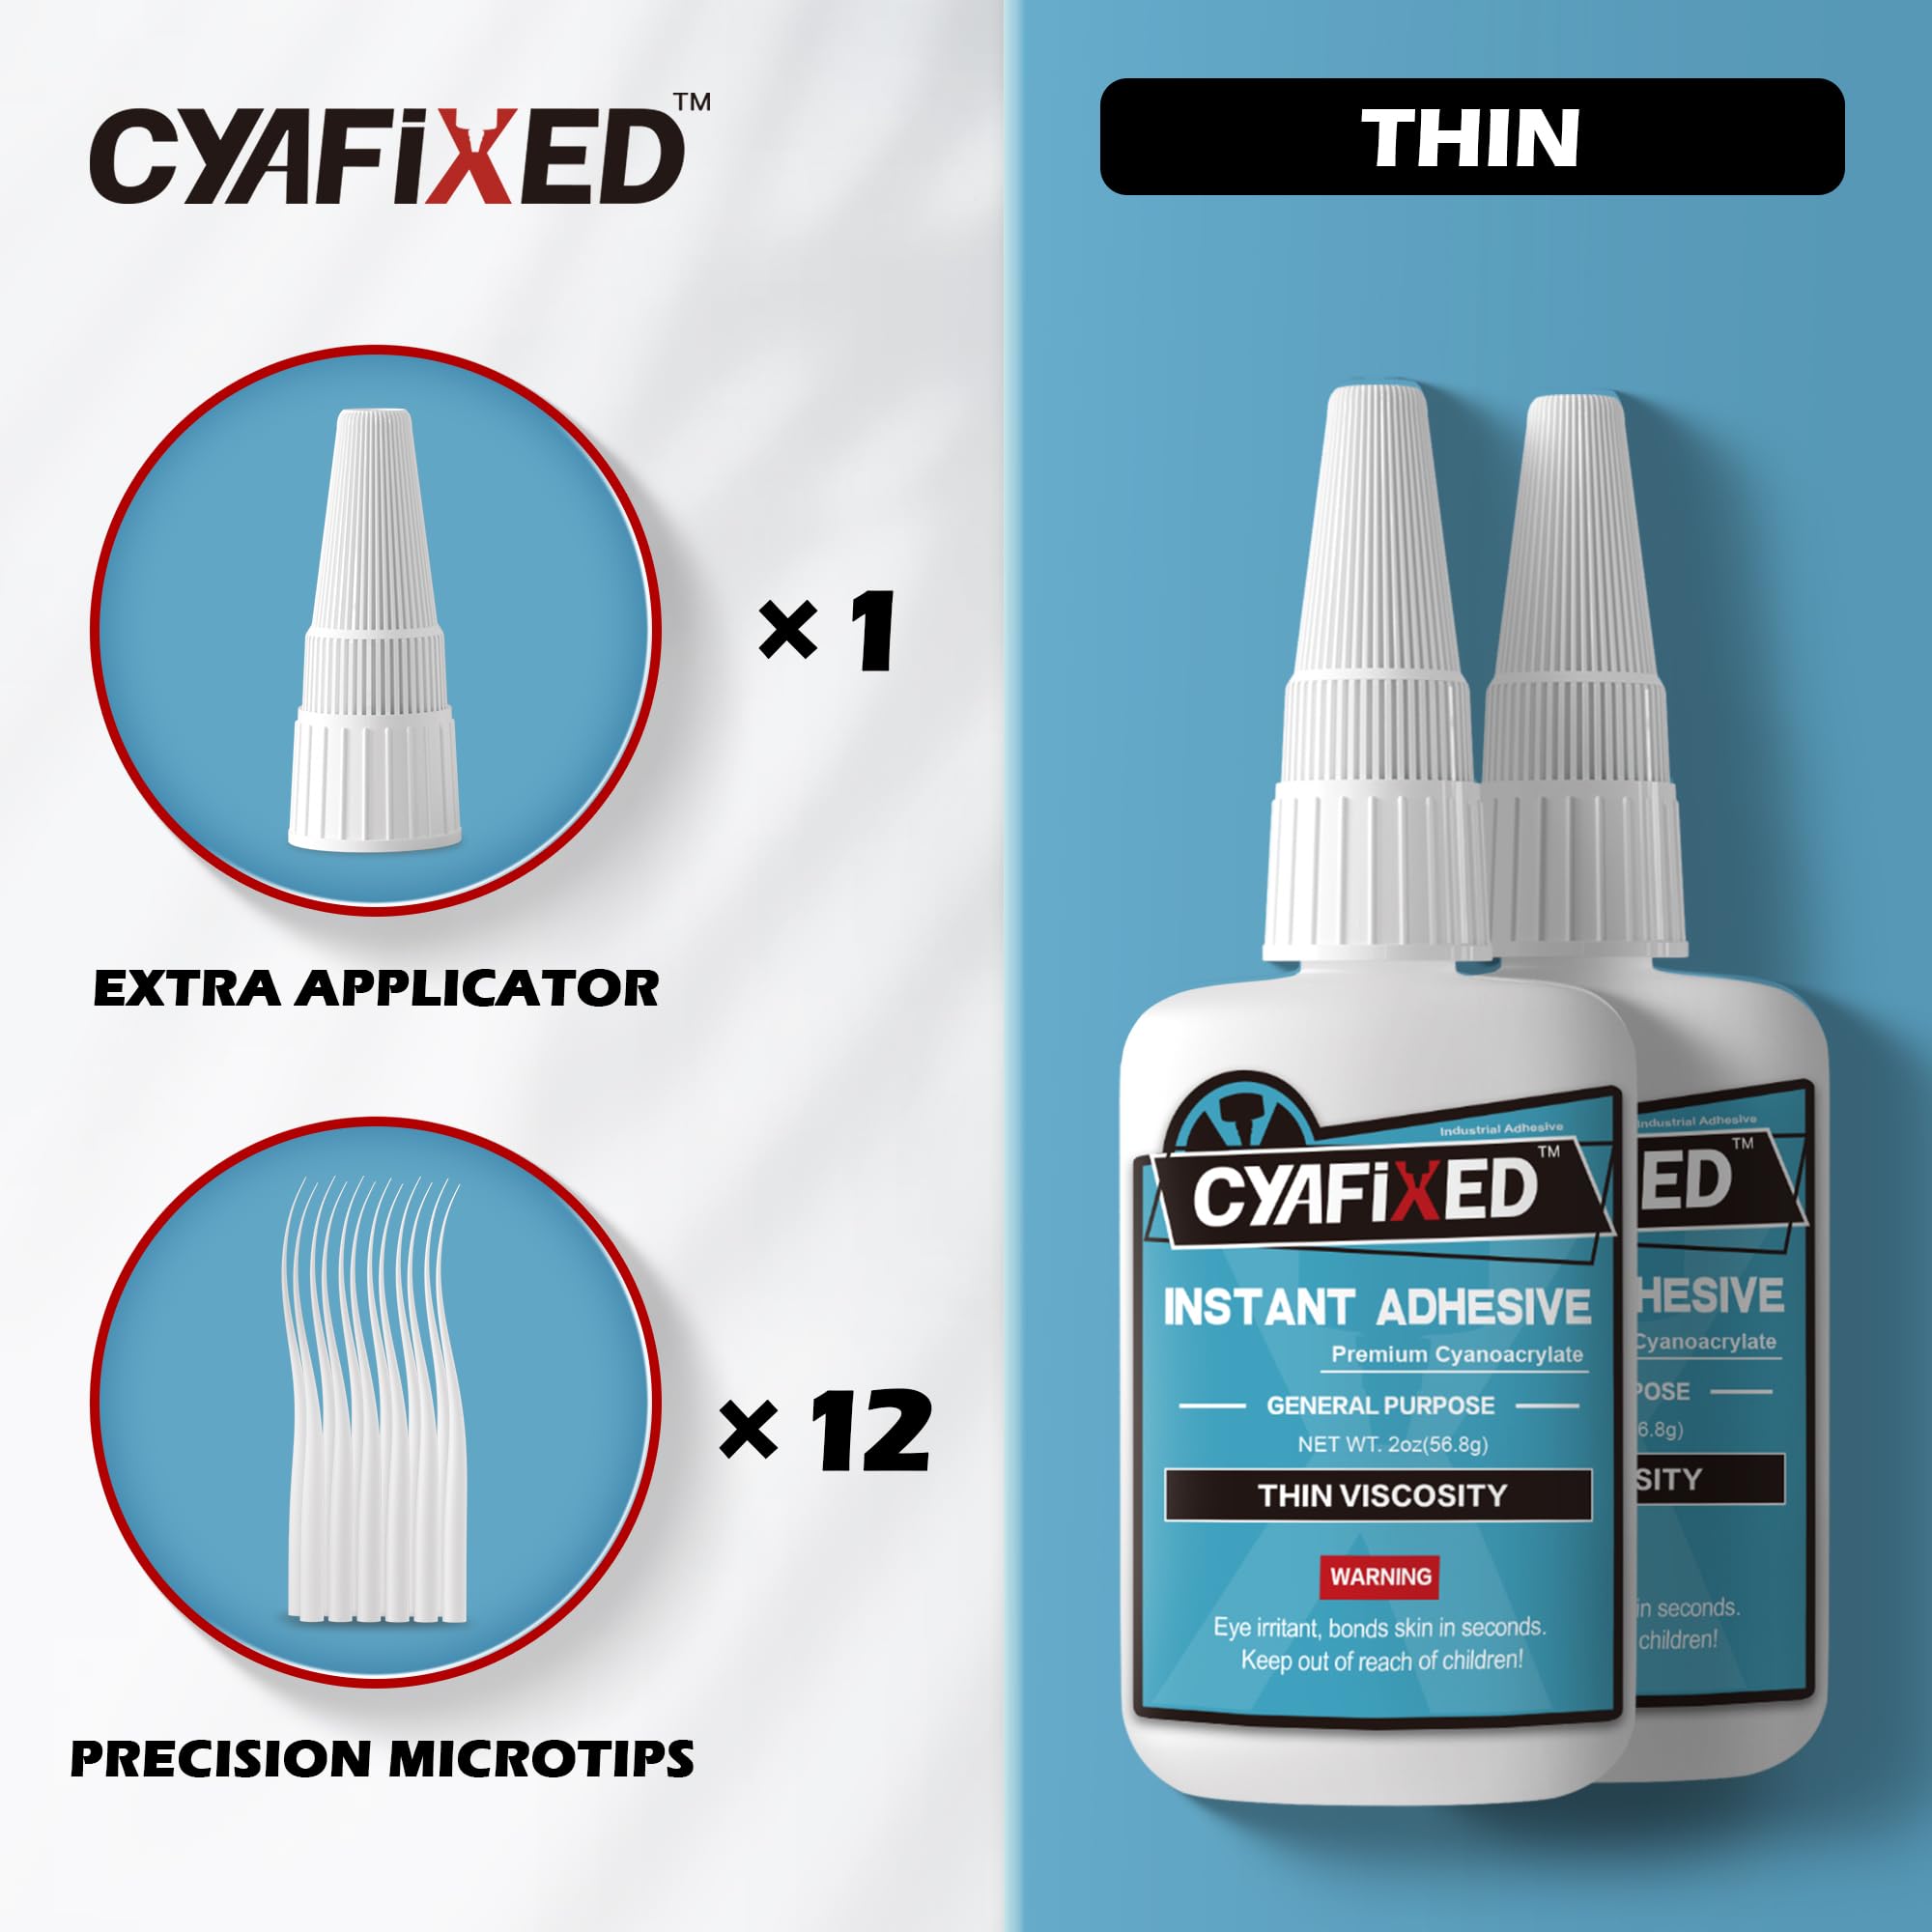 CYAFIXED Strong Cyanoacrylate (CA) Super Glue, Penetration Fast Thin Viscosity Instant Adhesive, 4 oz. (113.6 Grams) - CA Glue for Plastic, Wood, Metal, Hobby Models and Stabilizing Cracks